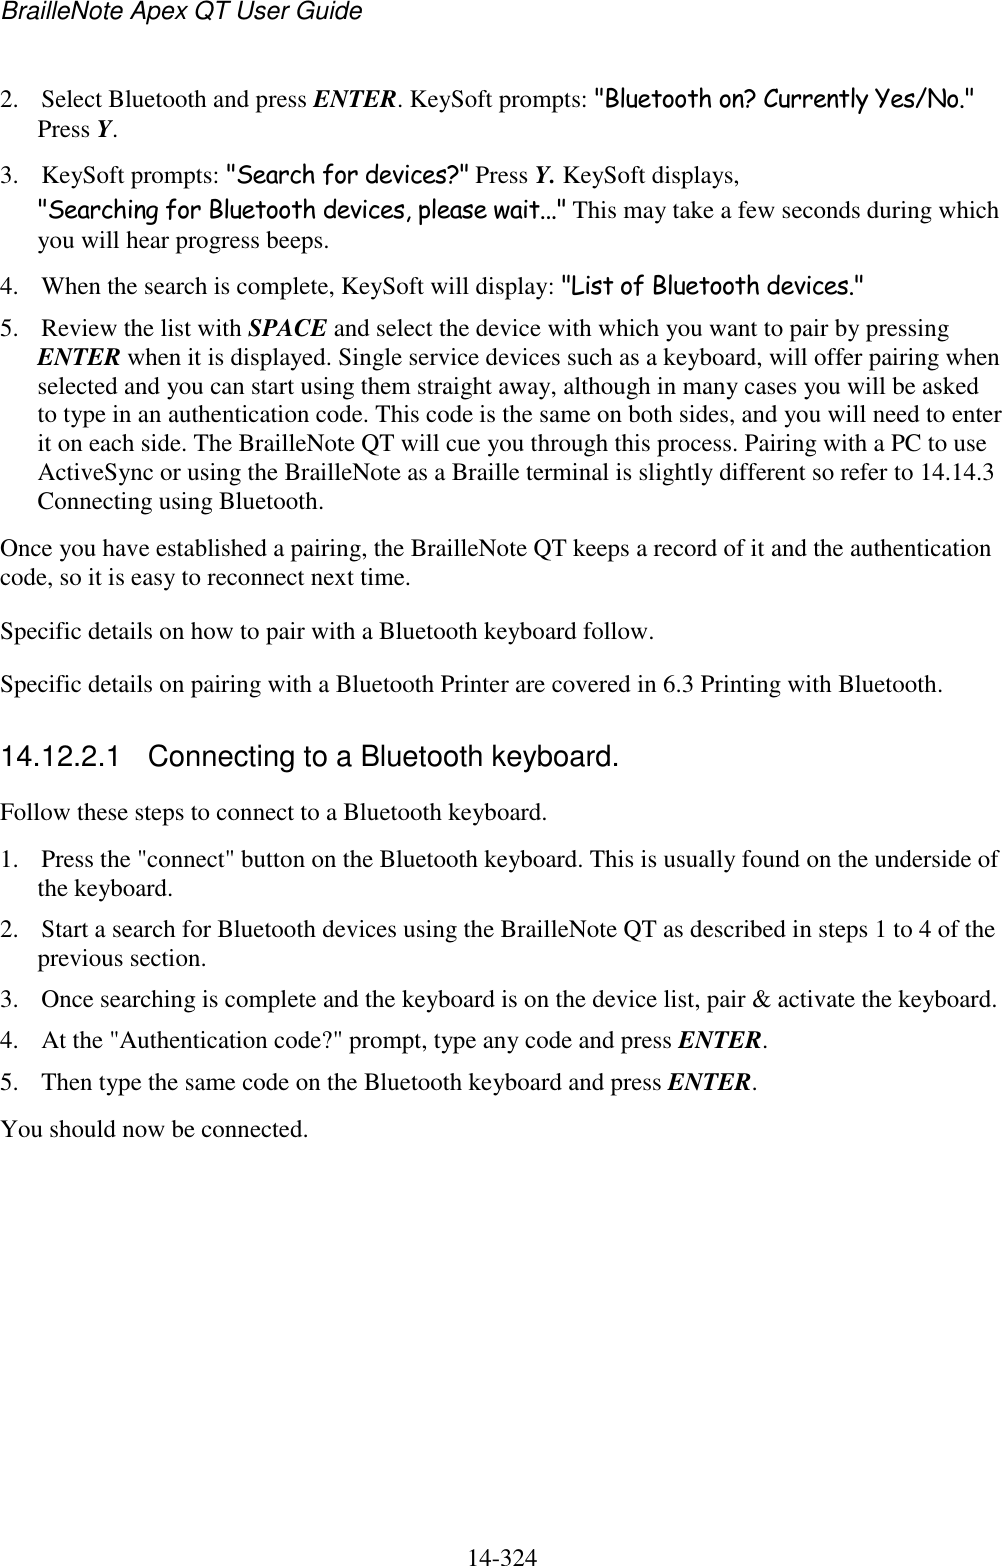 BrailleNote Apex QT User Guide  14-324   2. Select Bluetooth and press ENTER. KeySoft prompts: &quot;Bluetooth on? Currently Yes/No.&quot; Press Y. 3. KeySoft prompts: &quot;Search for devices?&quot; Press Y. KeySoft displays, &quot;Searching for Bluetooth devices, please wait...&quot; This may take a few seconds during which you will hear progress beeps. 4. When the search is complete, KeySoft will display: &quot;List of Bluetooth devices.&quot;  5. Review the list with SPACE and select the device with which you want to pair by pressing ENTER when it is displayed. Single service devices such as a keyboard, will offer pairing when selected and you can start using them straight away, although in many cases you will be asked to type in an authentication code. This code is the same on both sides, and you will need to enter it on each side. The BrailleNote QT will cue you through this process. Pairing with a PC to use ActiveSync or using the BrailleNote as a Braille terminal is slightly different so refer to 14.14.3 Connecting using Bluetooth. Once you have established a pairing, the BrailleNote QT keeps a record of it and the authentication code, so it is easy to reconnect next time. Specific details on how to pair with a Bluetooth keyboard follow.  Specific details on pairing with a Bluetooth Printer are covered in 6.3 Printing with Bluetooth.  14.12.2.1  Connecting to a Bluetooth keyboard. Follow these steps to connect to a Bluetooth keyboard. 1. Press the &quot;connect&quot; button on the Bluetooth keyboard. This is usually found on the underside of the keyboard. 2. Start a search for Bluetooth devices using the BrailleNote QT as described in steps 1 to 4 of the previous section. 3. Once searching is complete and the keyboard is on the device list, pair &amp; activate the keyboard. 4. At the &quot;Authentication code?&quot; prompt, type any code and press ENTER. 5. Then type the same code on the Bluetooth keyboard and press ENTER. You should now be connected.   